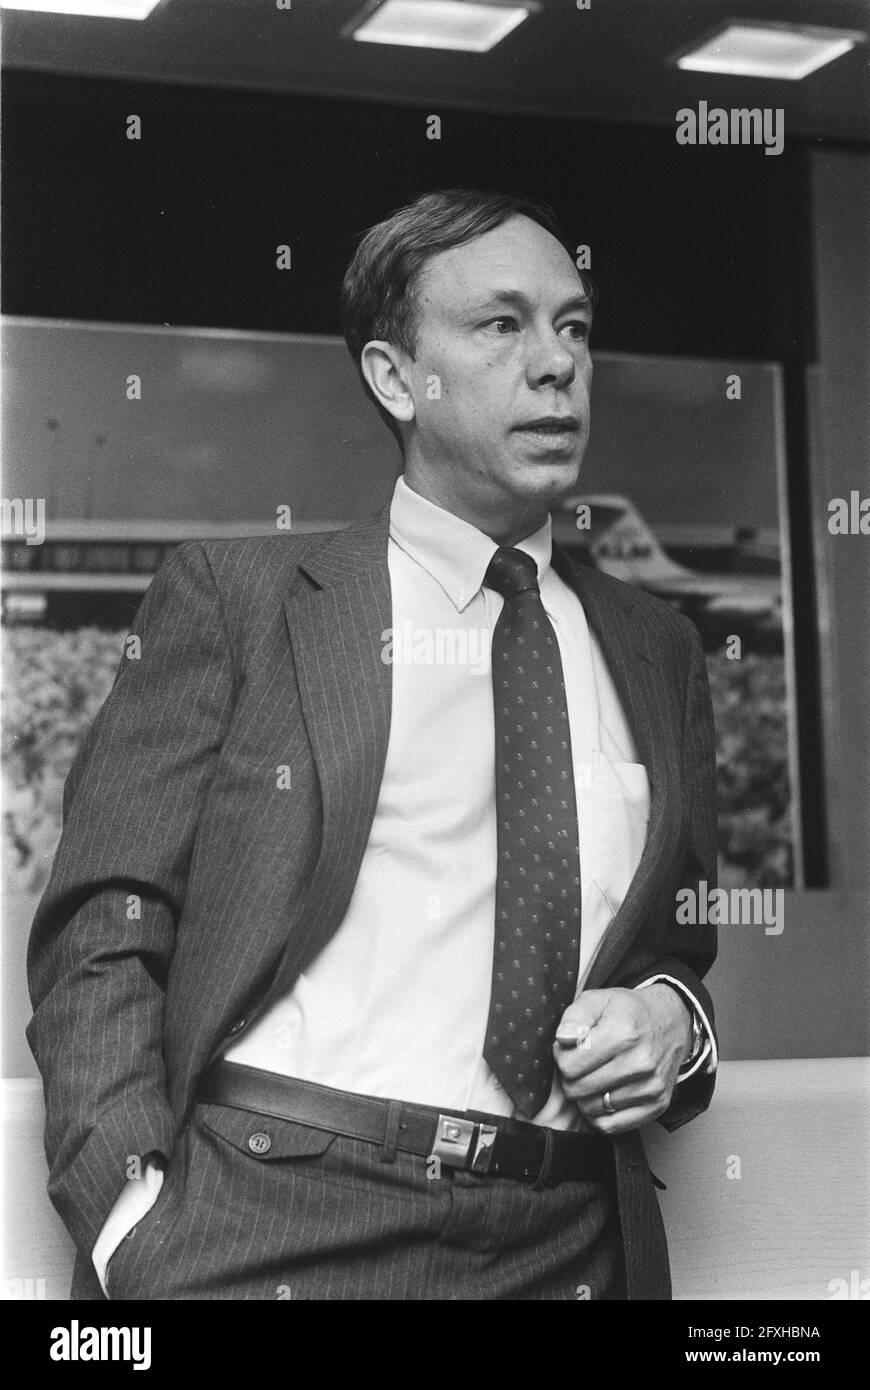 Chairman Board of Directors Atari (game console), James J. Morgan gives press conference at Schiphol Airport, April 16, 1984, press conferences, presidents, The Netherlands, 20th century press agency photo, news to remember, documentary, historic photography 1945-1990, visual stories, human history of the Twentieth Century, capturing moments in time Stock Photo